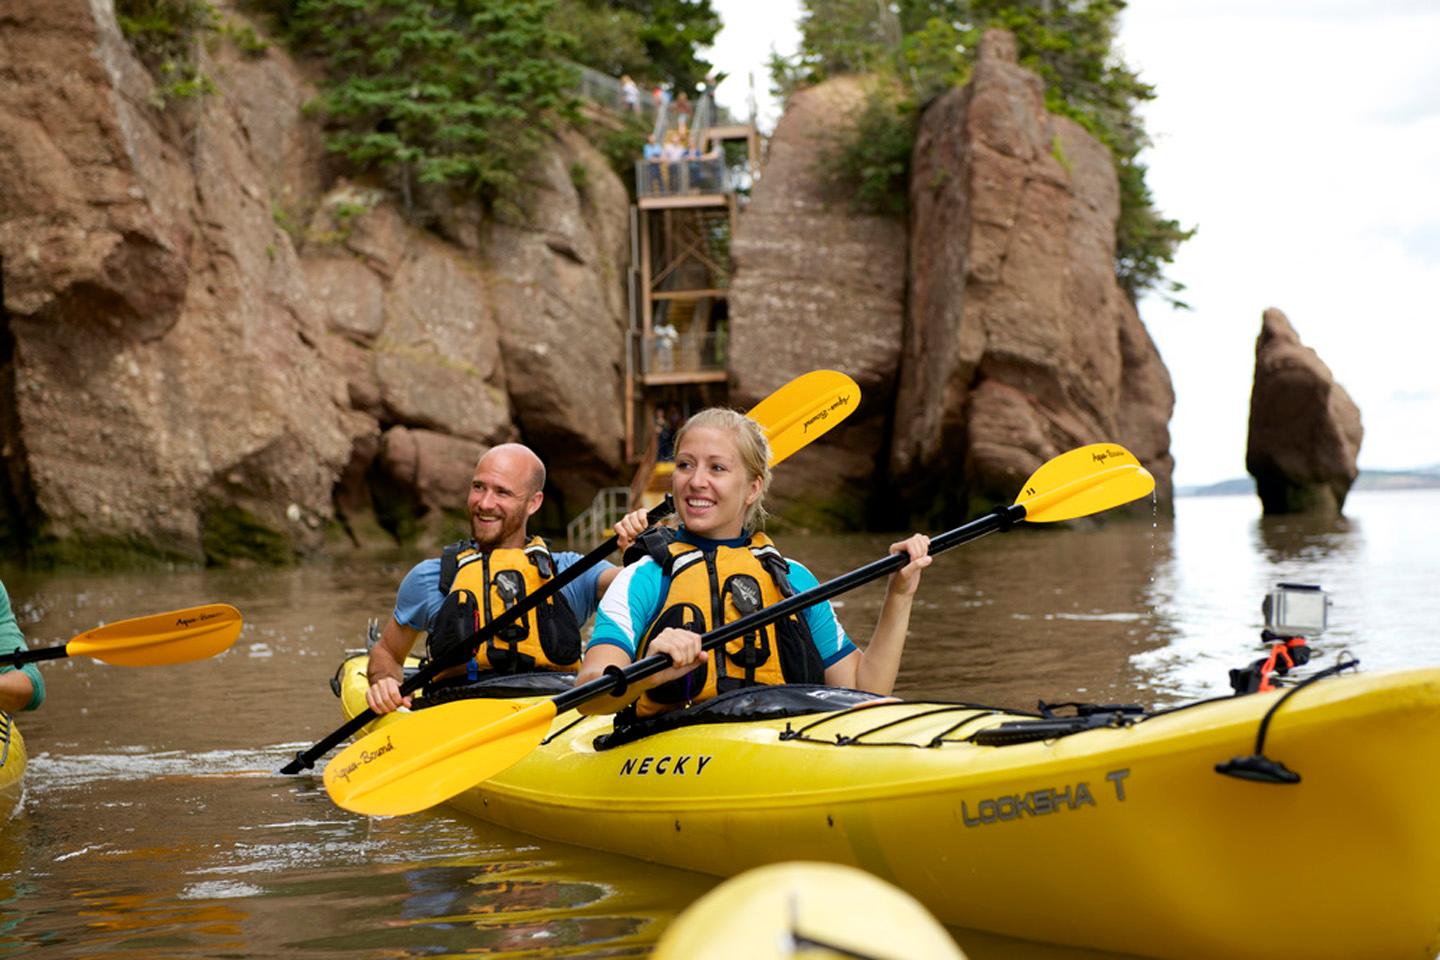 Paddle the red rock coastline in tandem kayaks — the longest stretch of coastal wilderness on the eastern shore